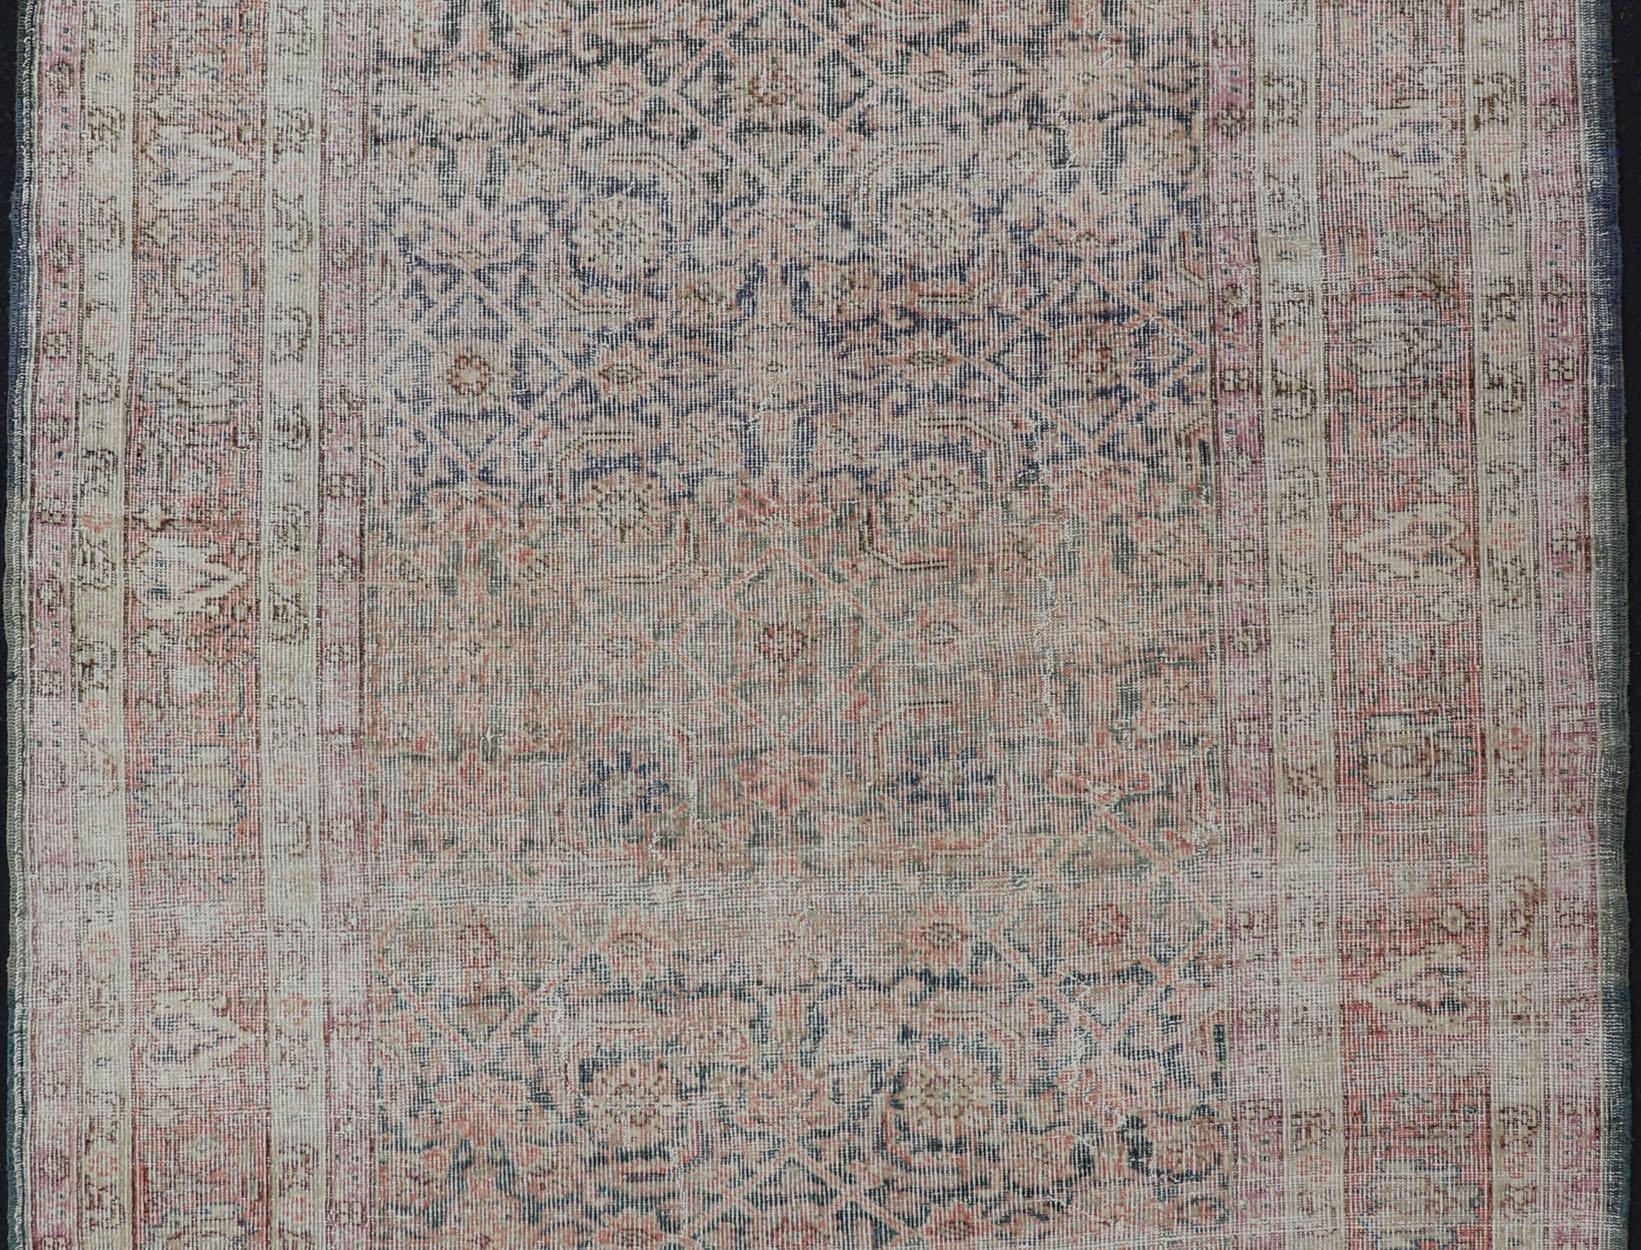 Antique Persian Malayer Rug in Variegated Gray-Blue, Cream and Soft Pink For Sale 2